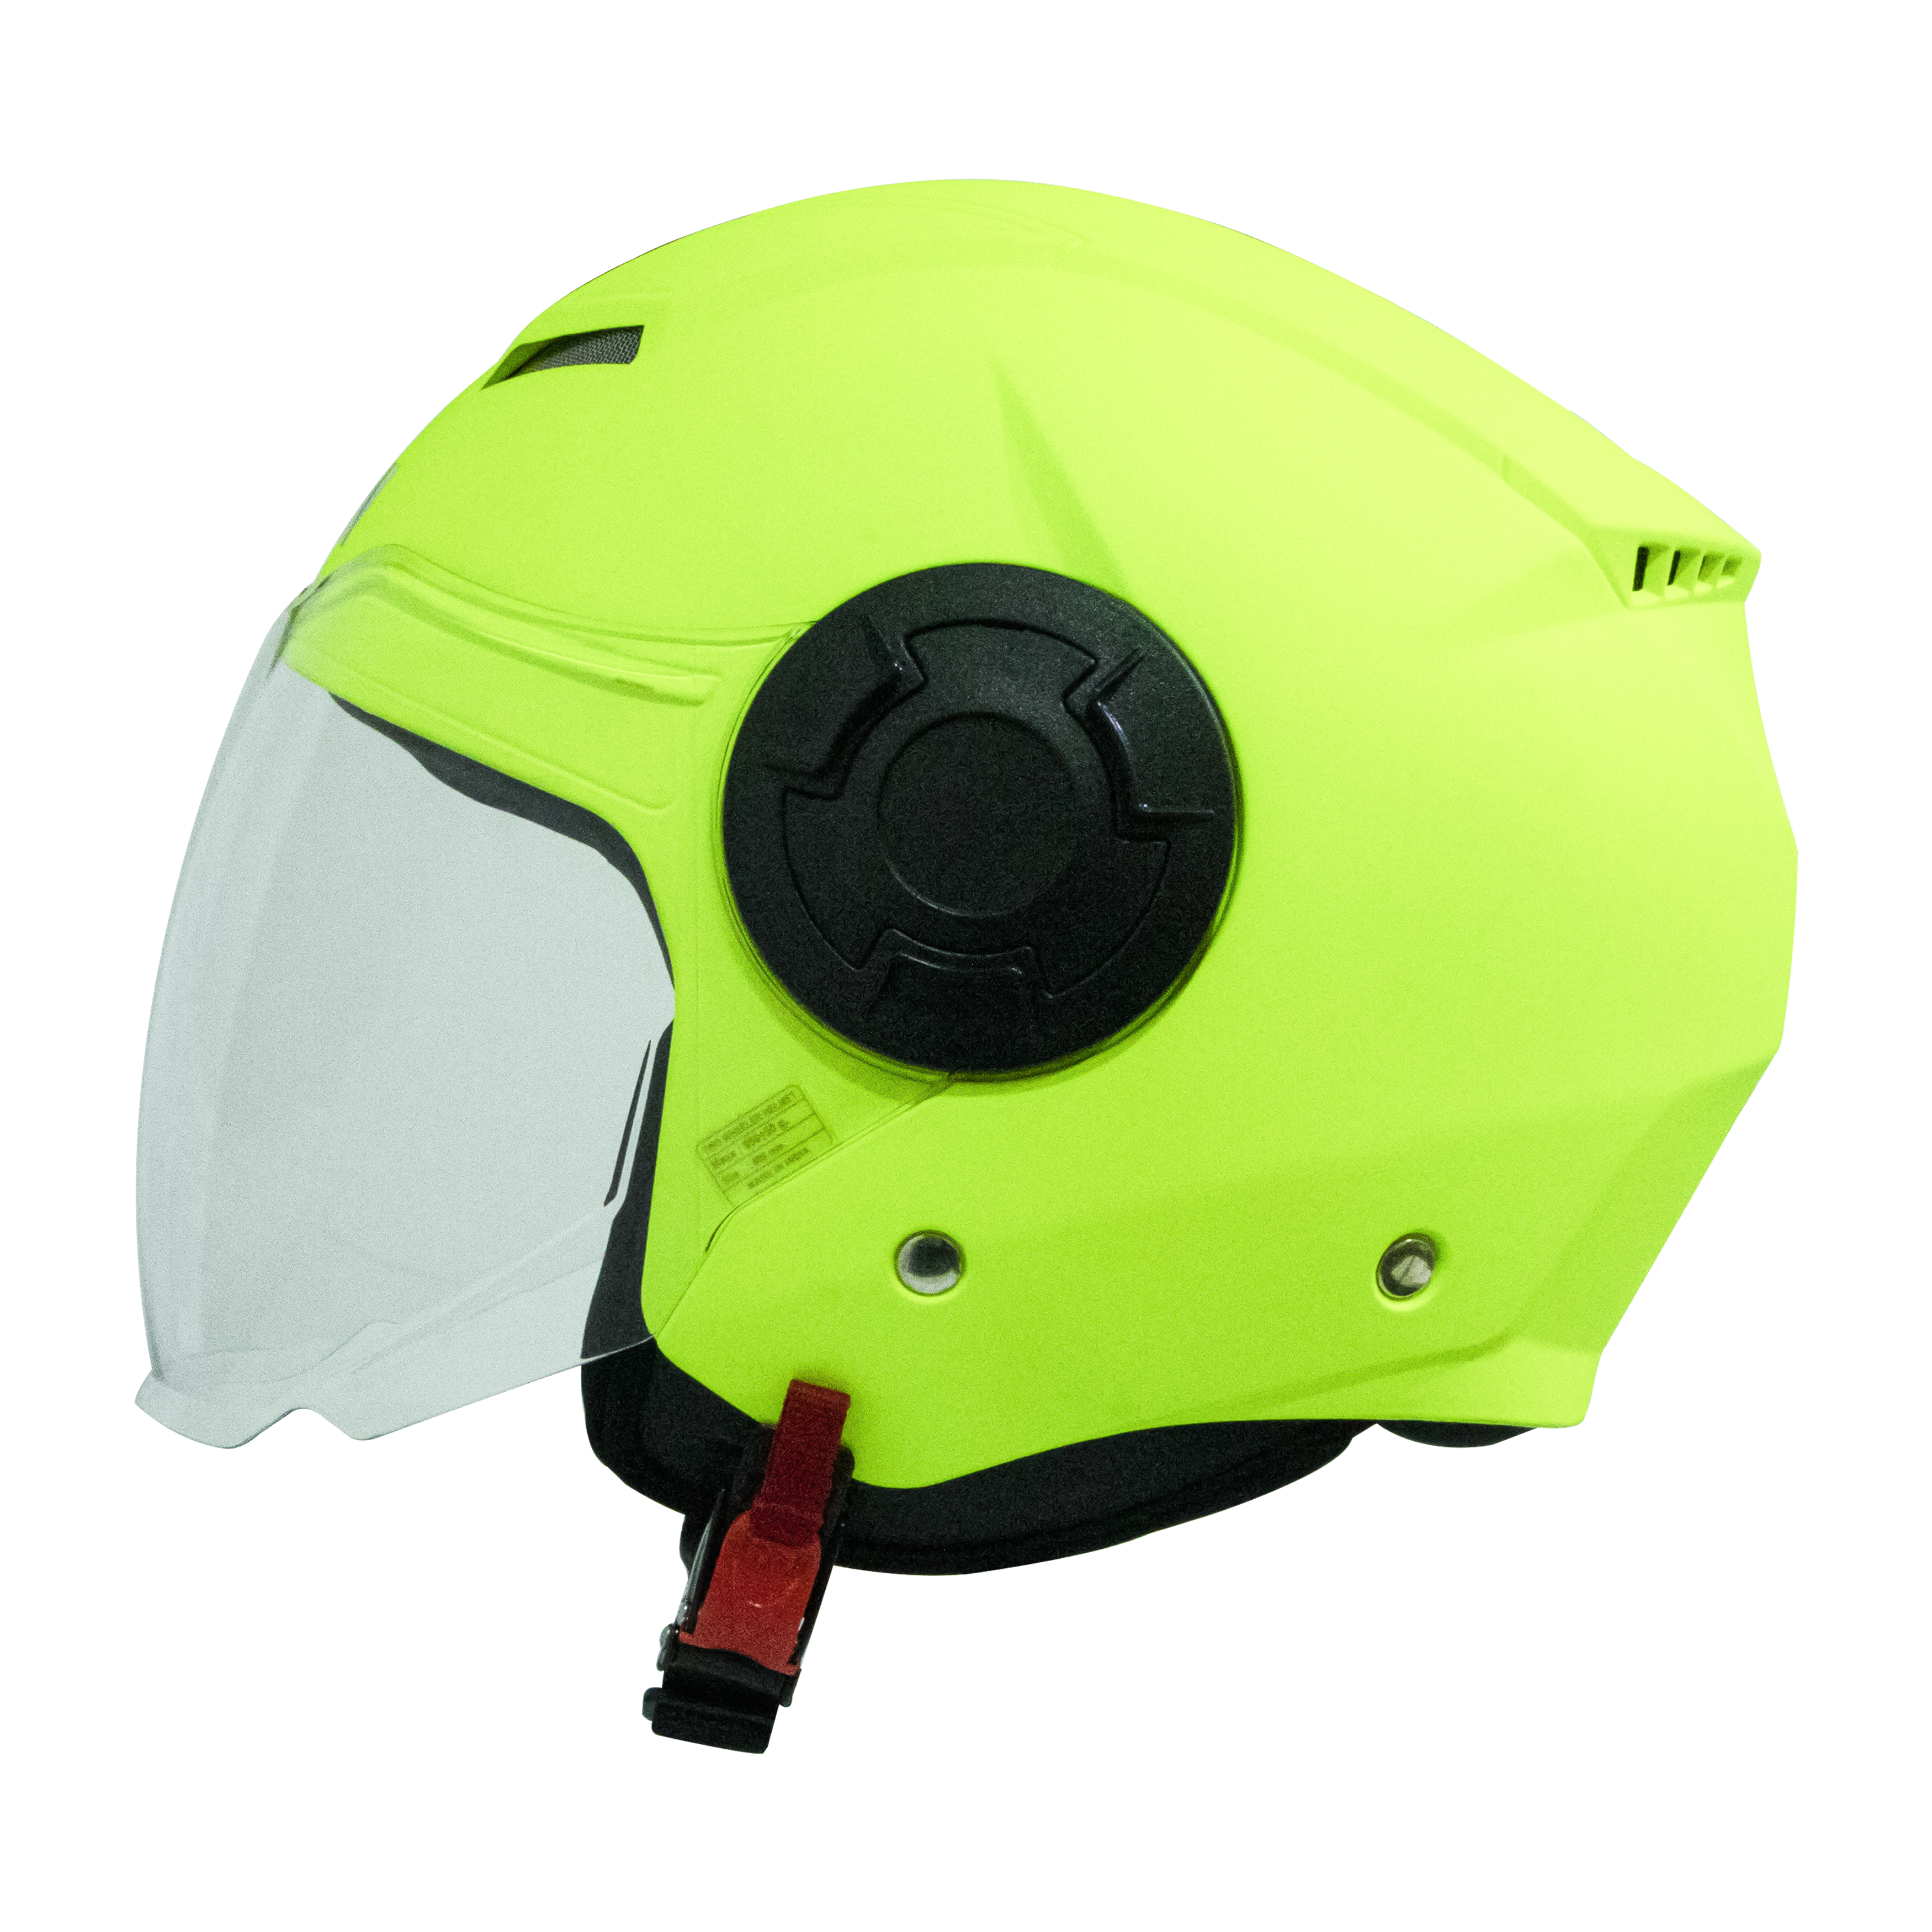 SBH-31 ARIA GLOSSY FLUO NEON